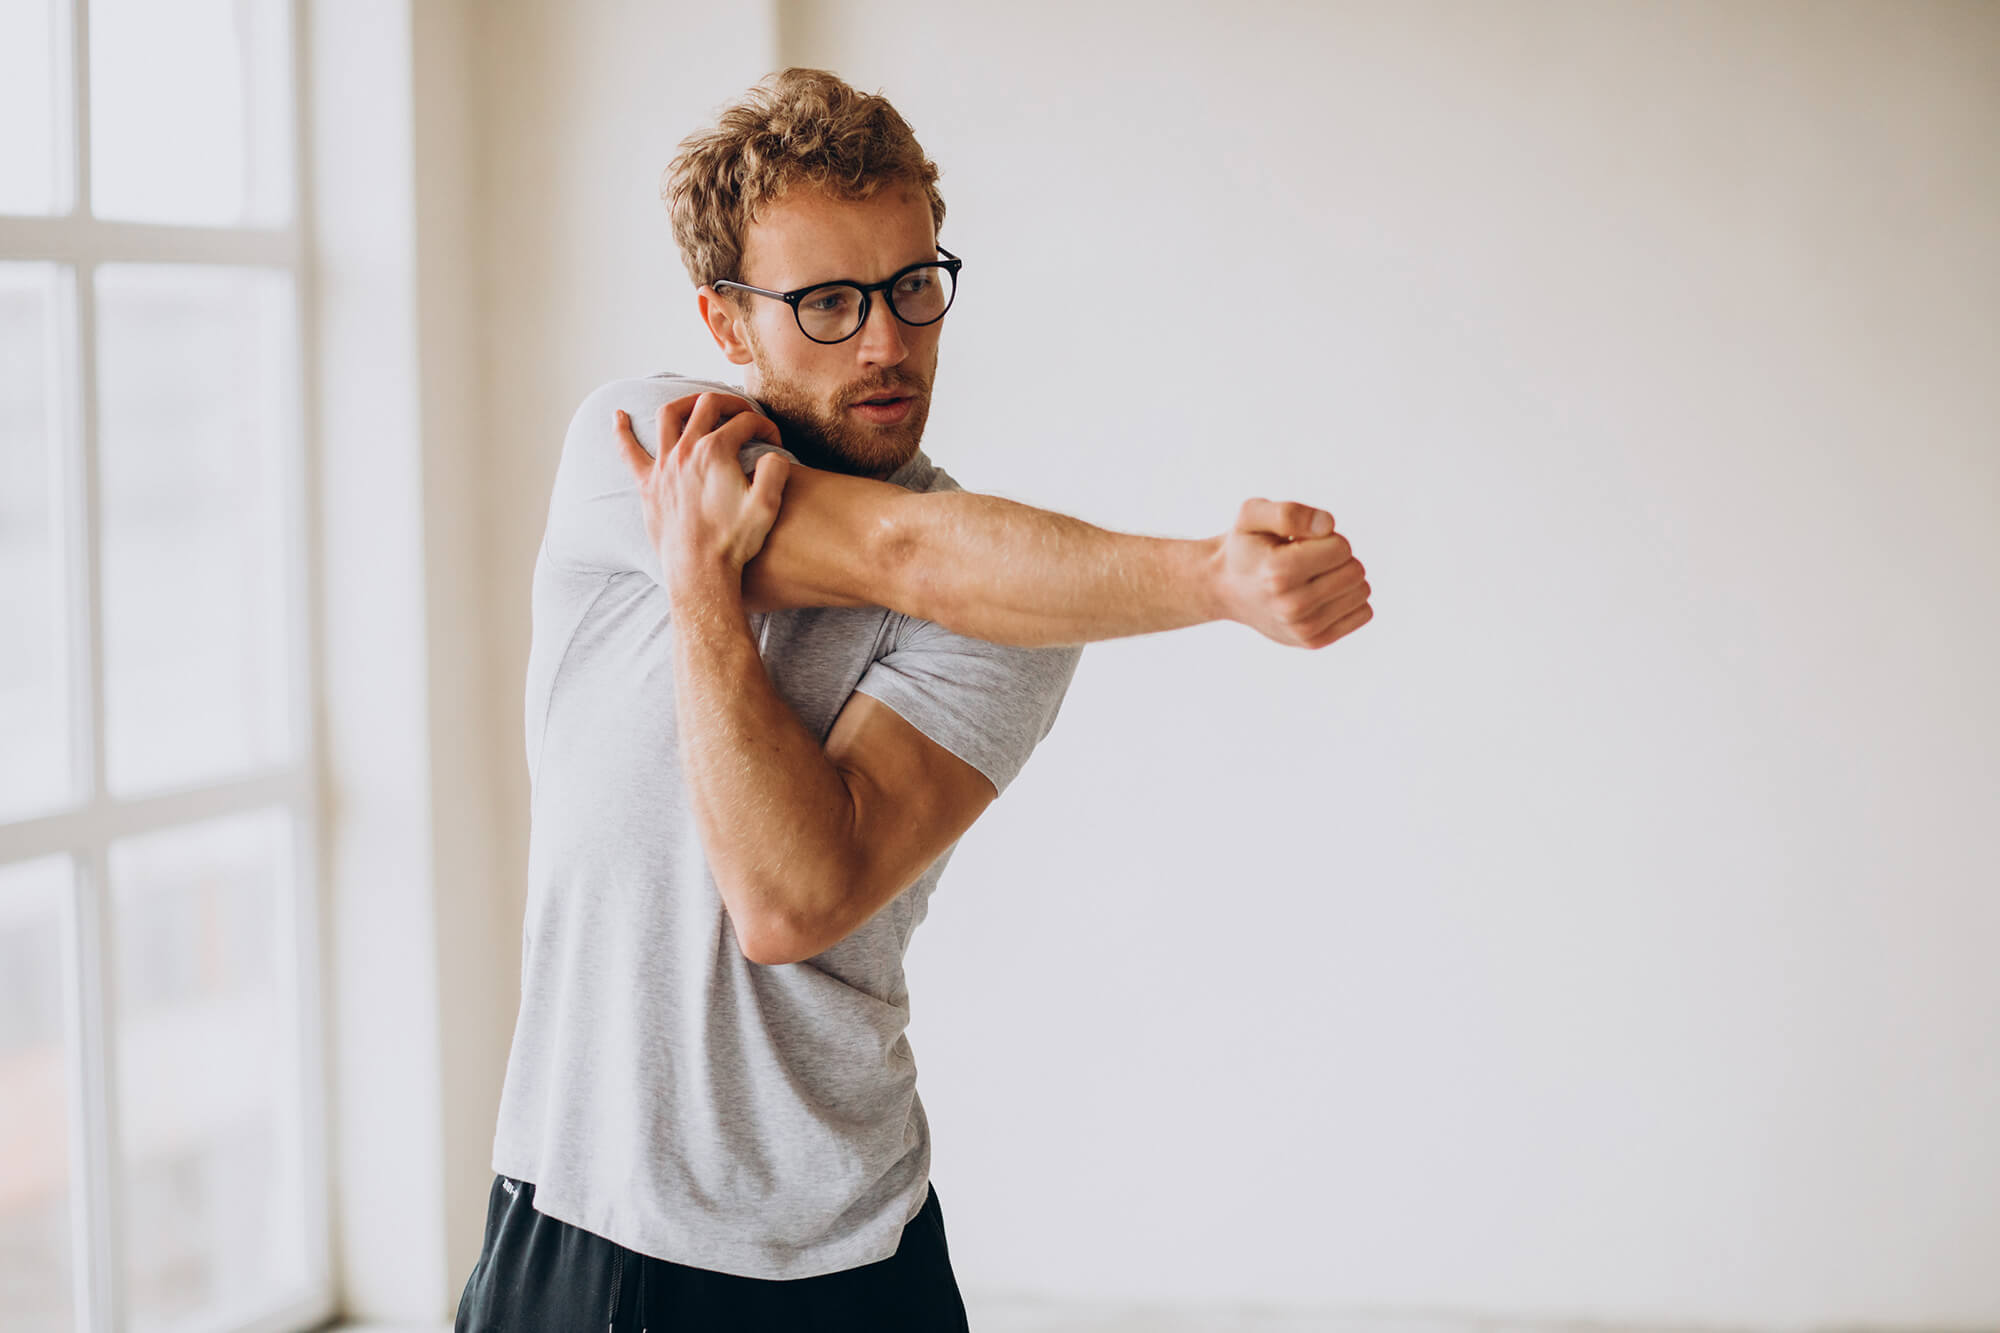 5 Great Exercises to Alleviate Shoulder Arthritis Pain